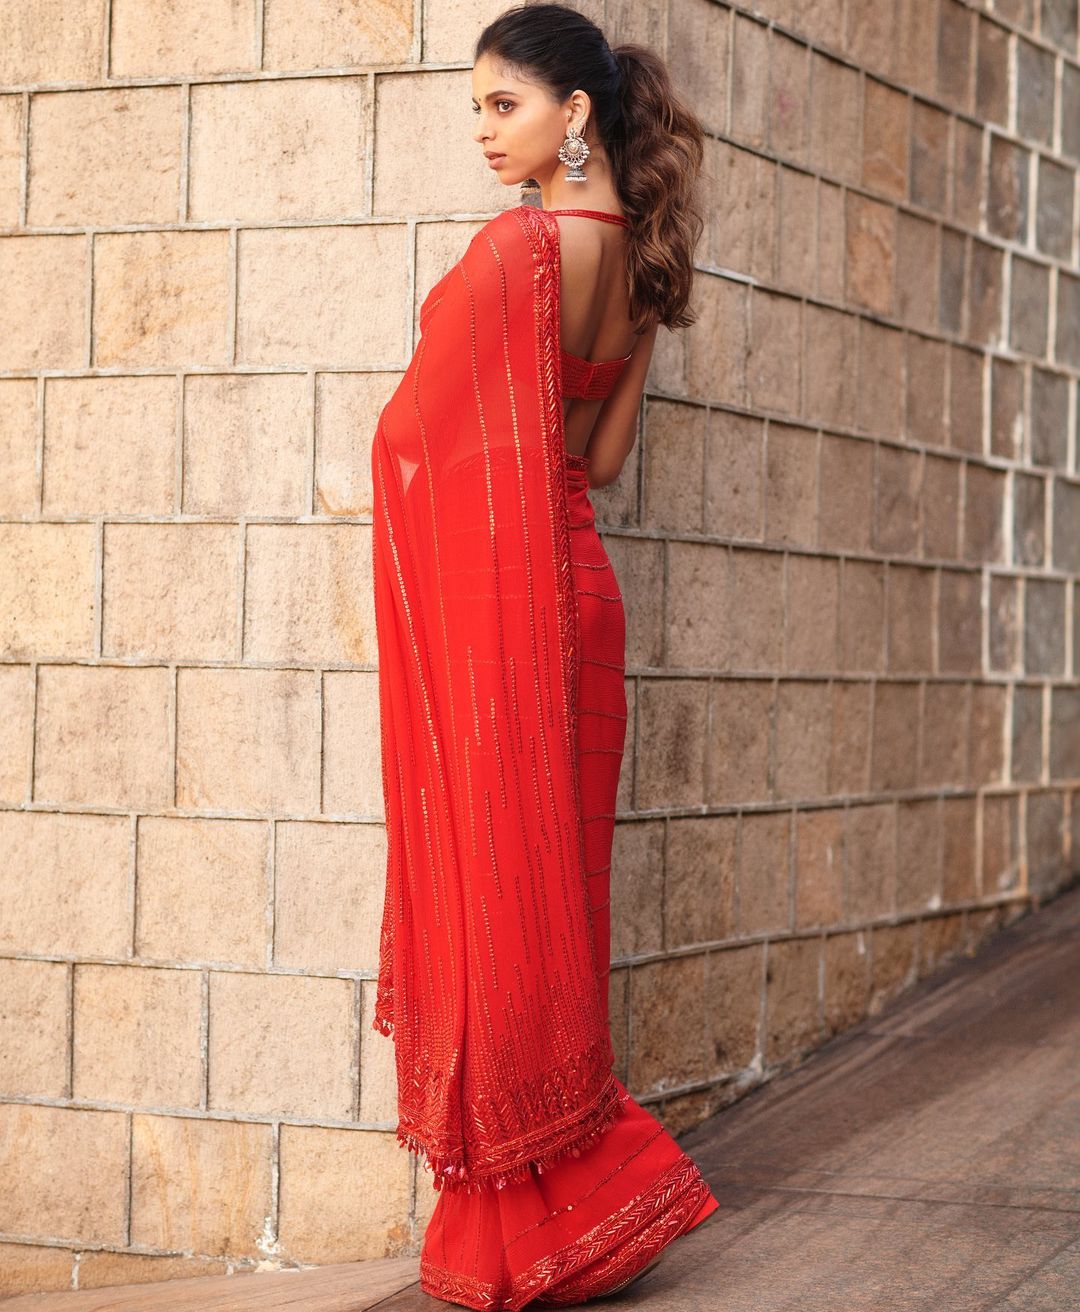 The Red Embroidered Saree Look Of Suhana Khan